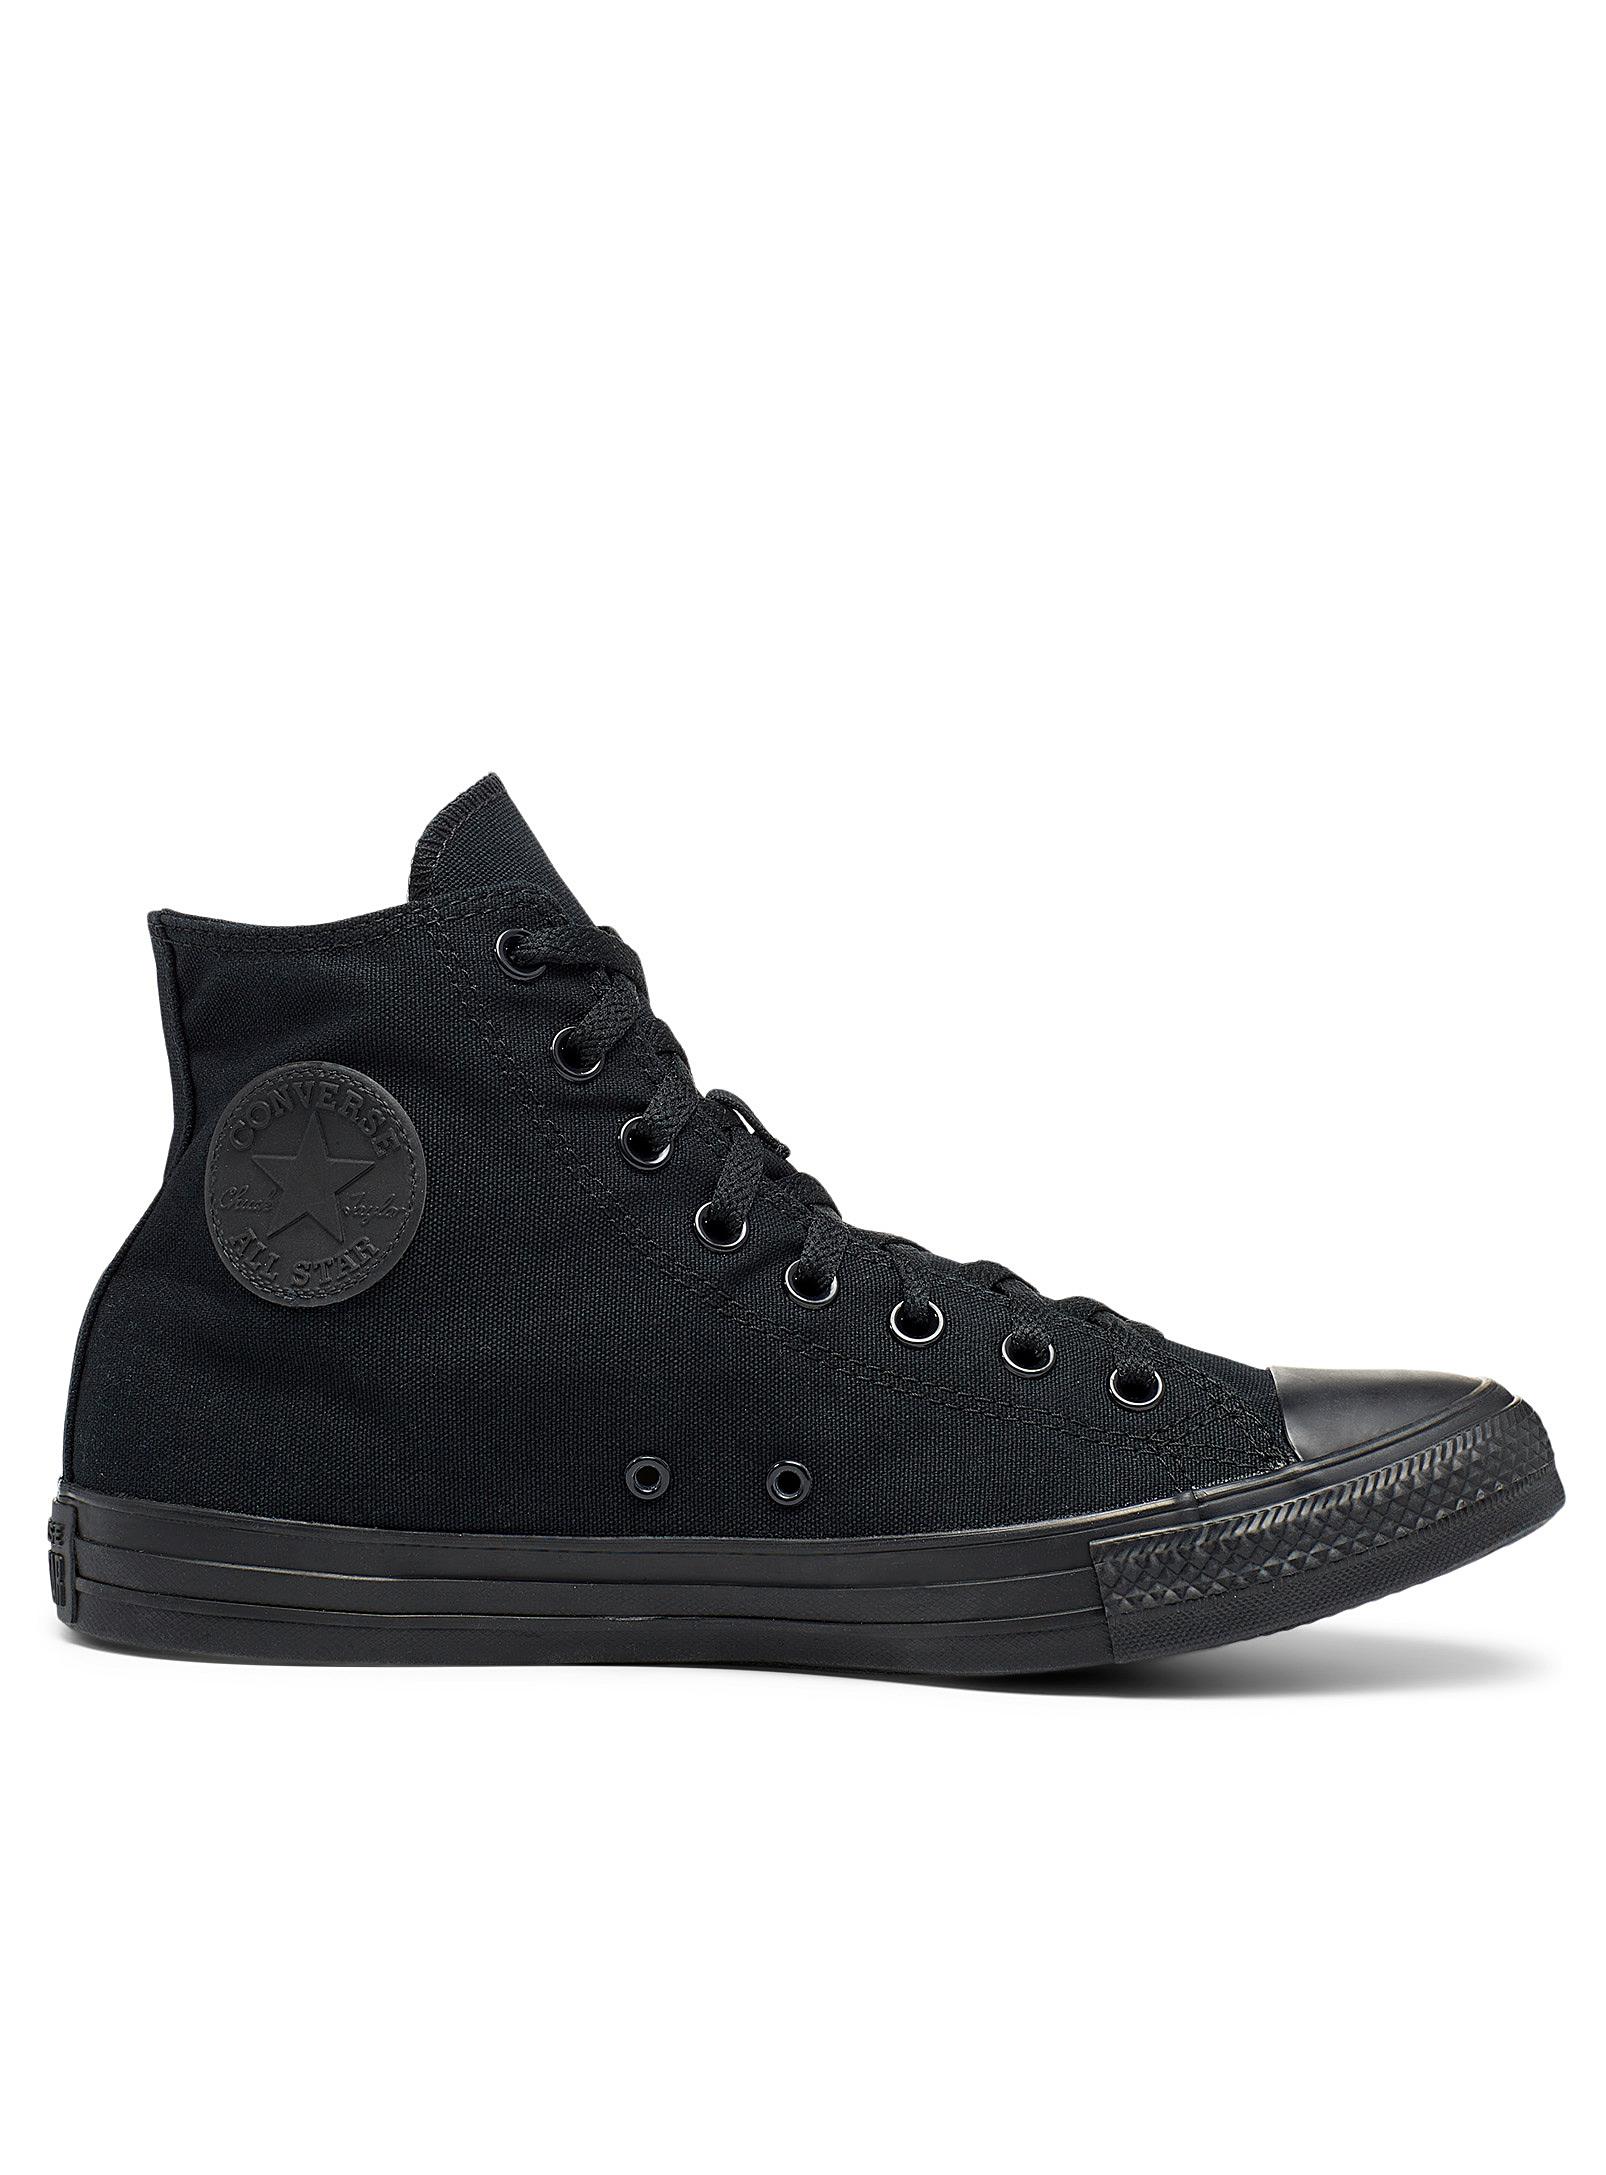 Converse Black Gore-tex® Utility Chuck 70 High Sneakers for Men | Lyst